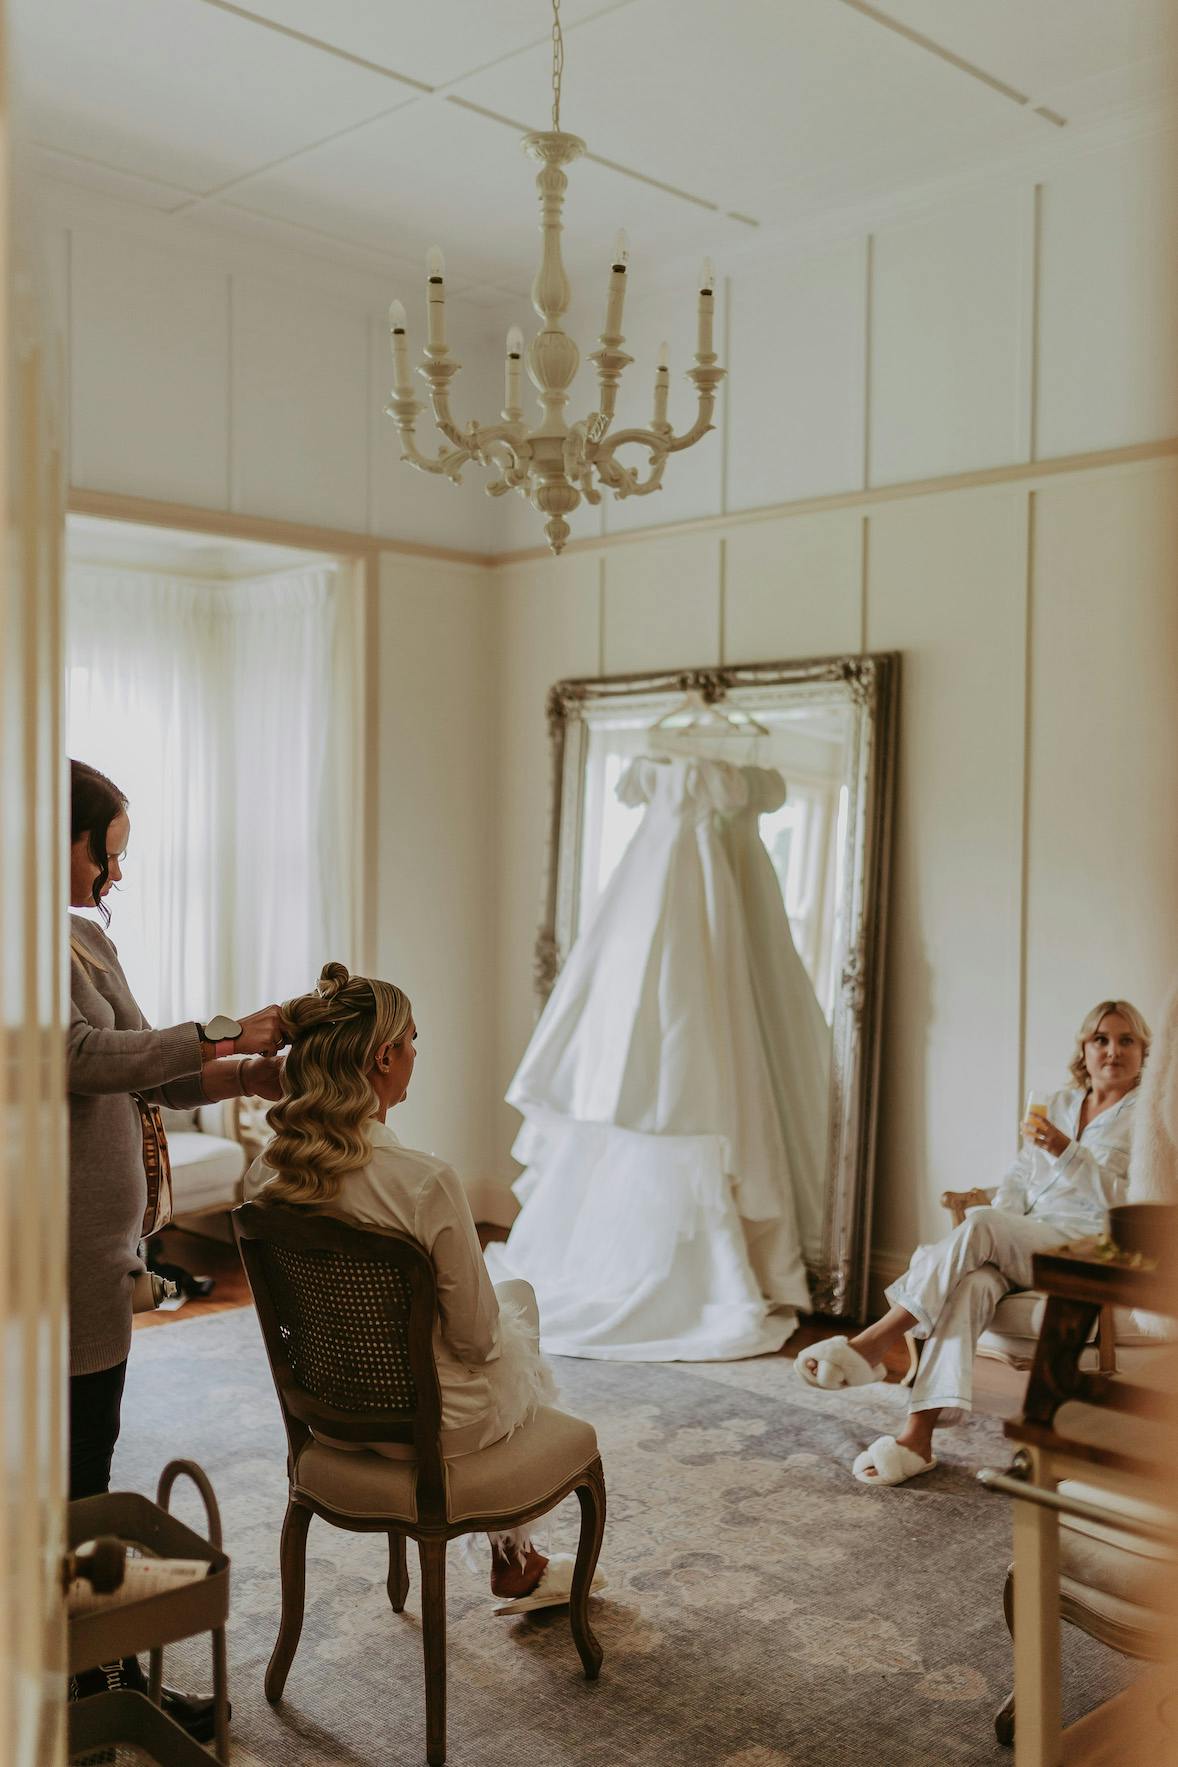 A bride sits on a chair while getting her hair styled by another person, with a long white wedding dress hanging on a large ornate mirror in the background. Two other women dressed in white robes are sitting on a couch in the cozy, elegantly decorated room.